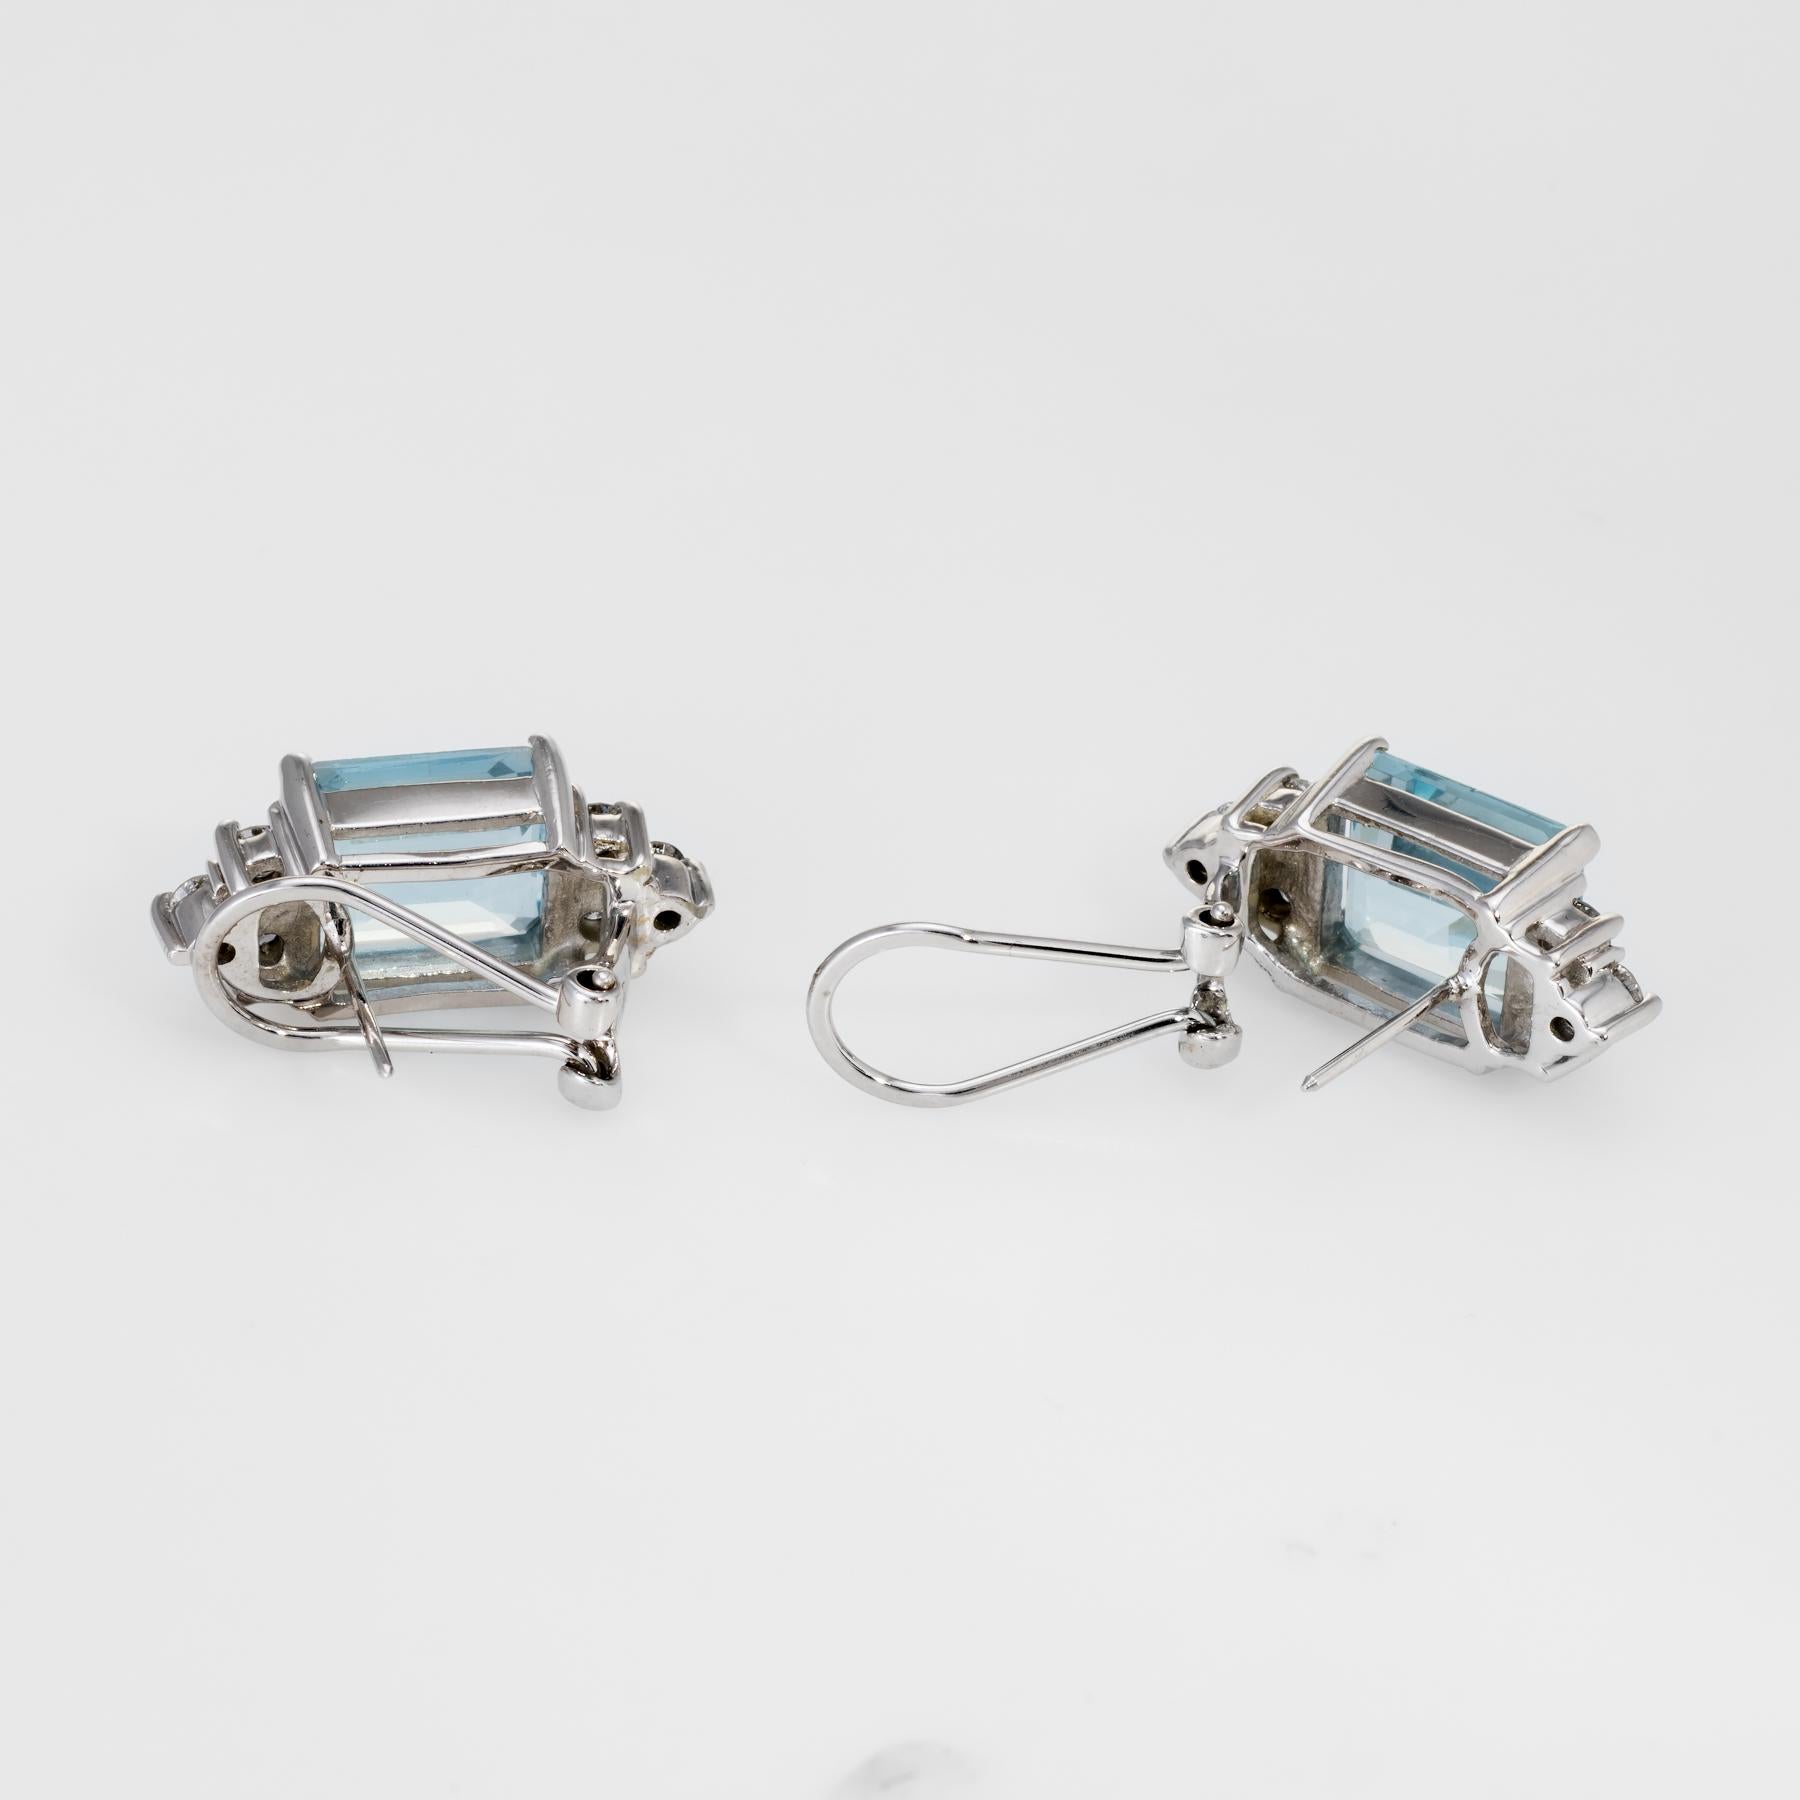 Elegant pair of aquamarine & diamond earrings, crafted in 14k white gold. 

Emerald cut aquamarines each measure 10mm x 8mm (estimated at 3.25 carats each - 6.50 carats total estimated weight), accented with an estimated 0.60 carats of diamonds